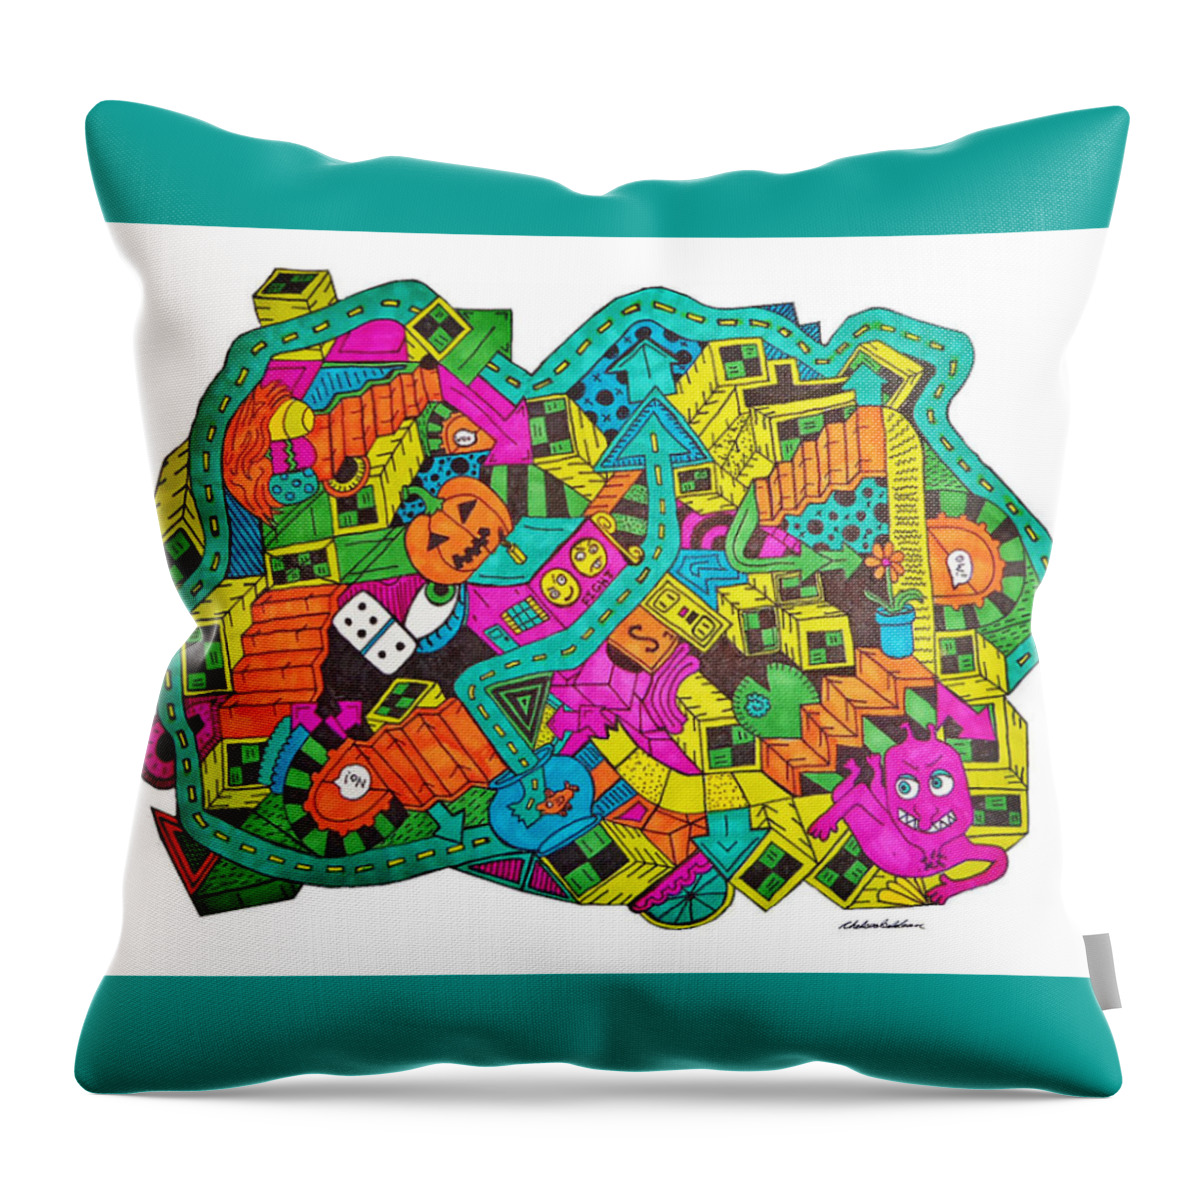 Surreal Throw Pillow featuring the drawing Boing by Chelsea Geldean